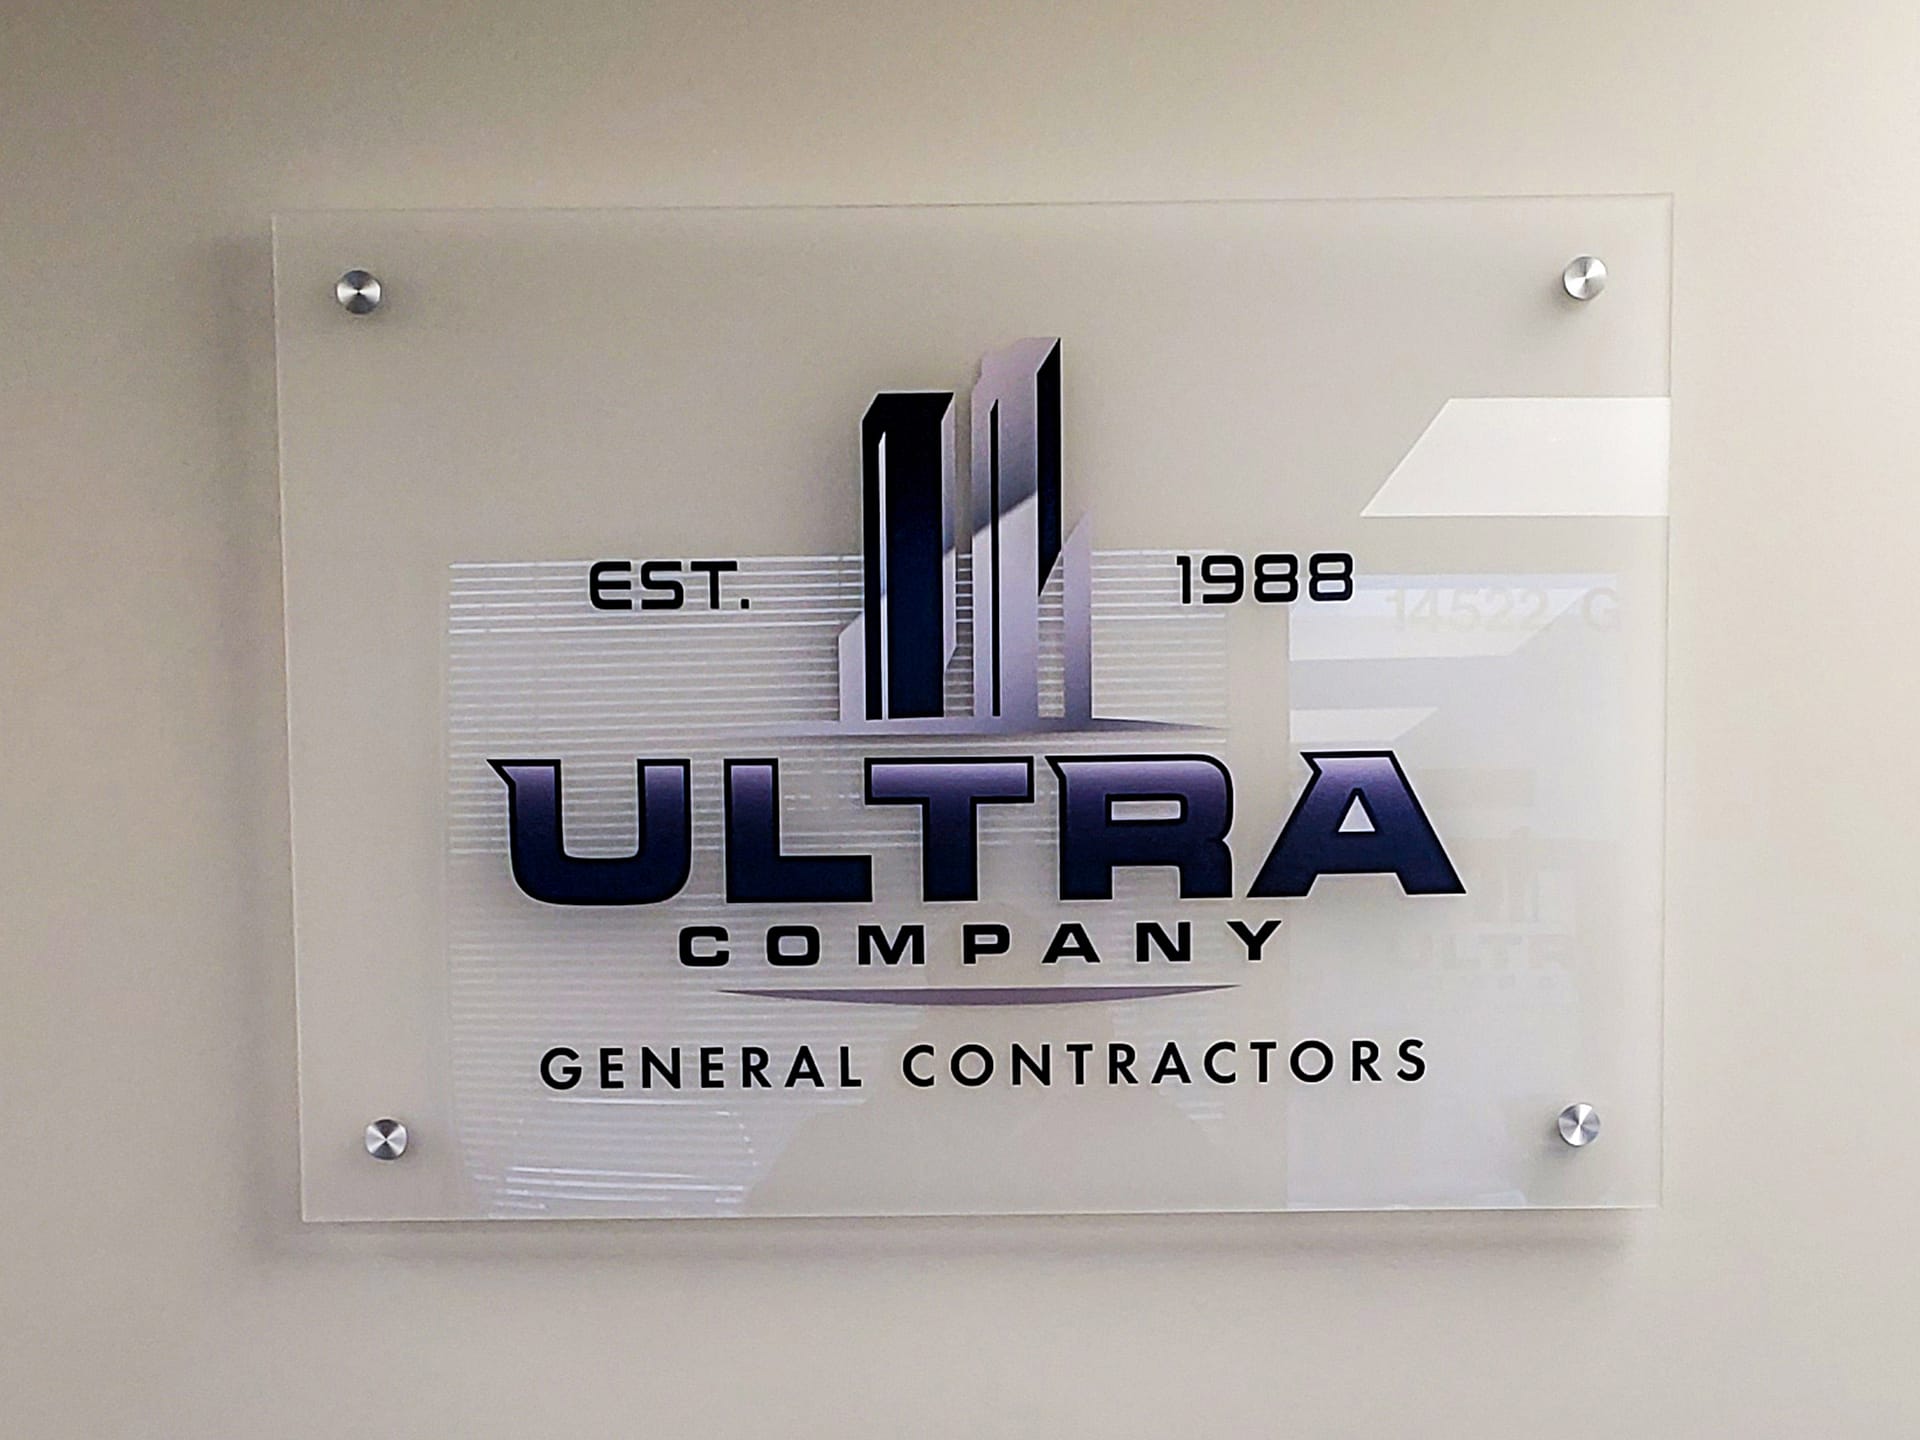 Frosted acrylic sign with a full color logo adhered to the face.